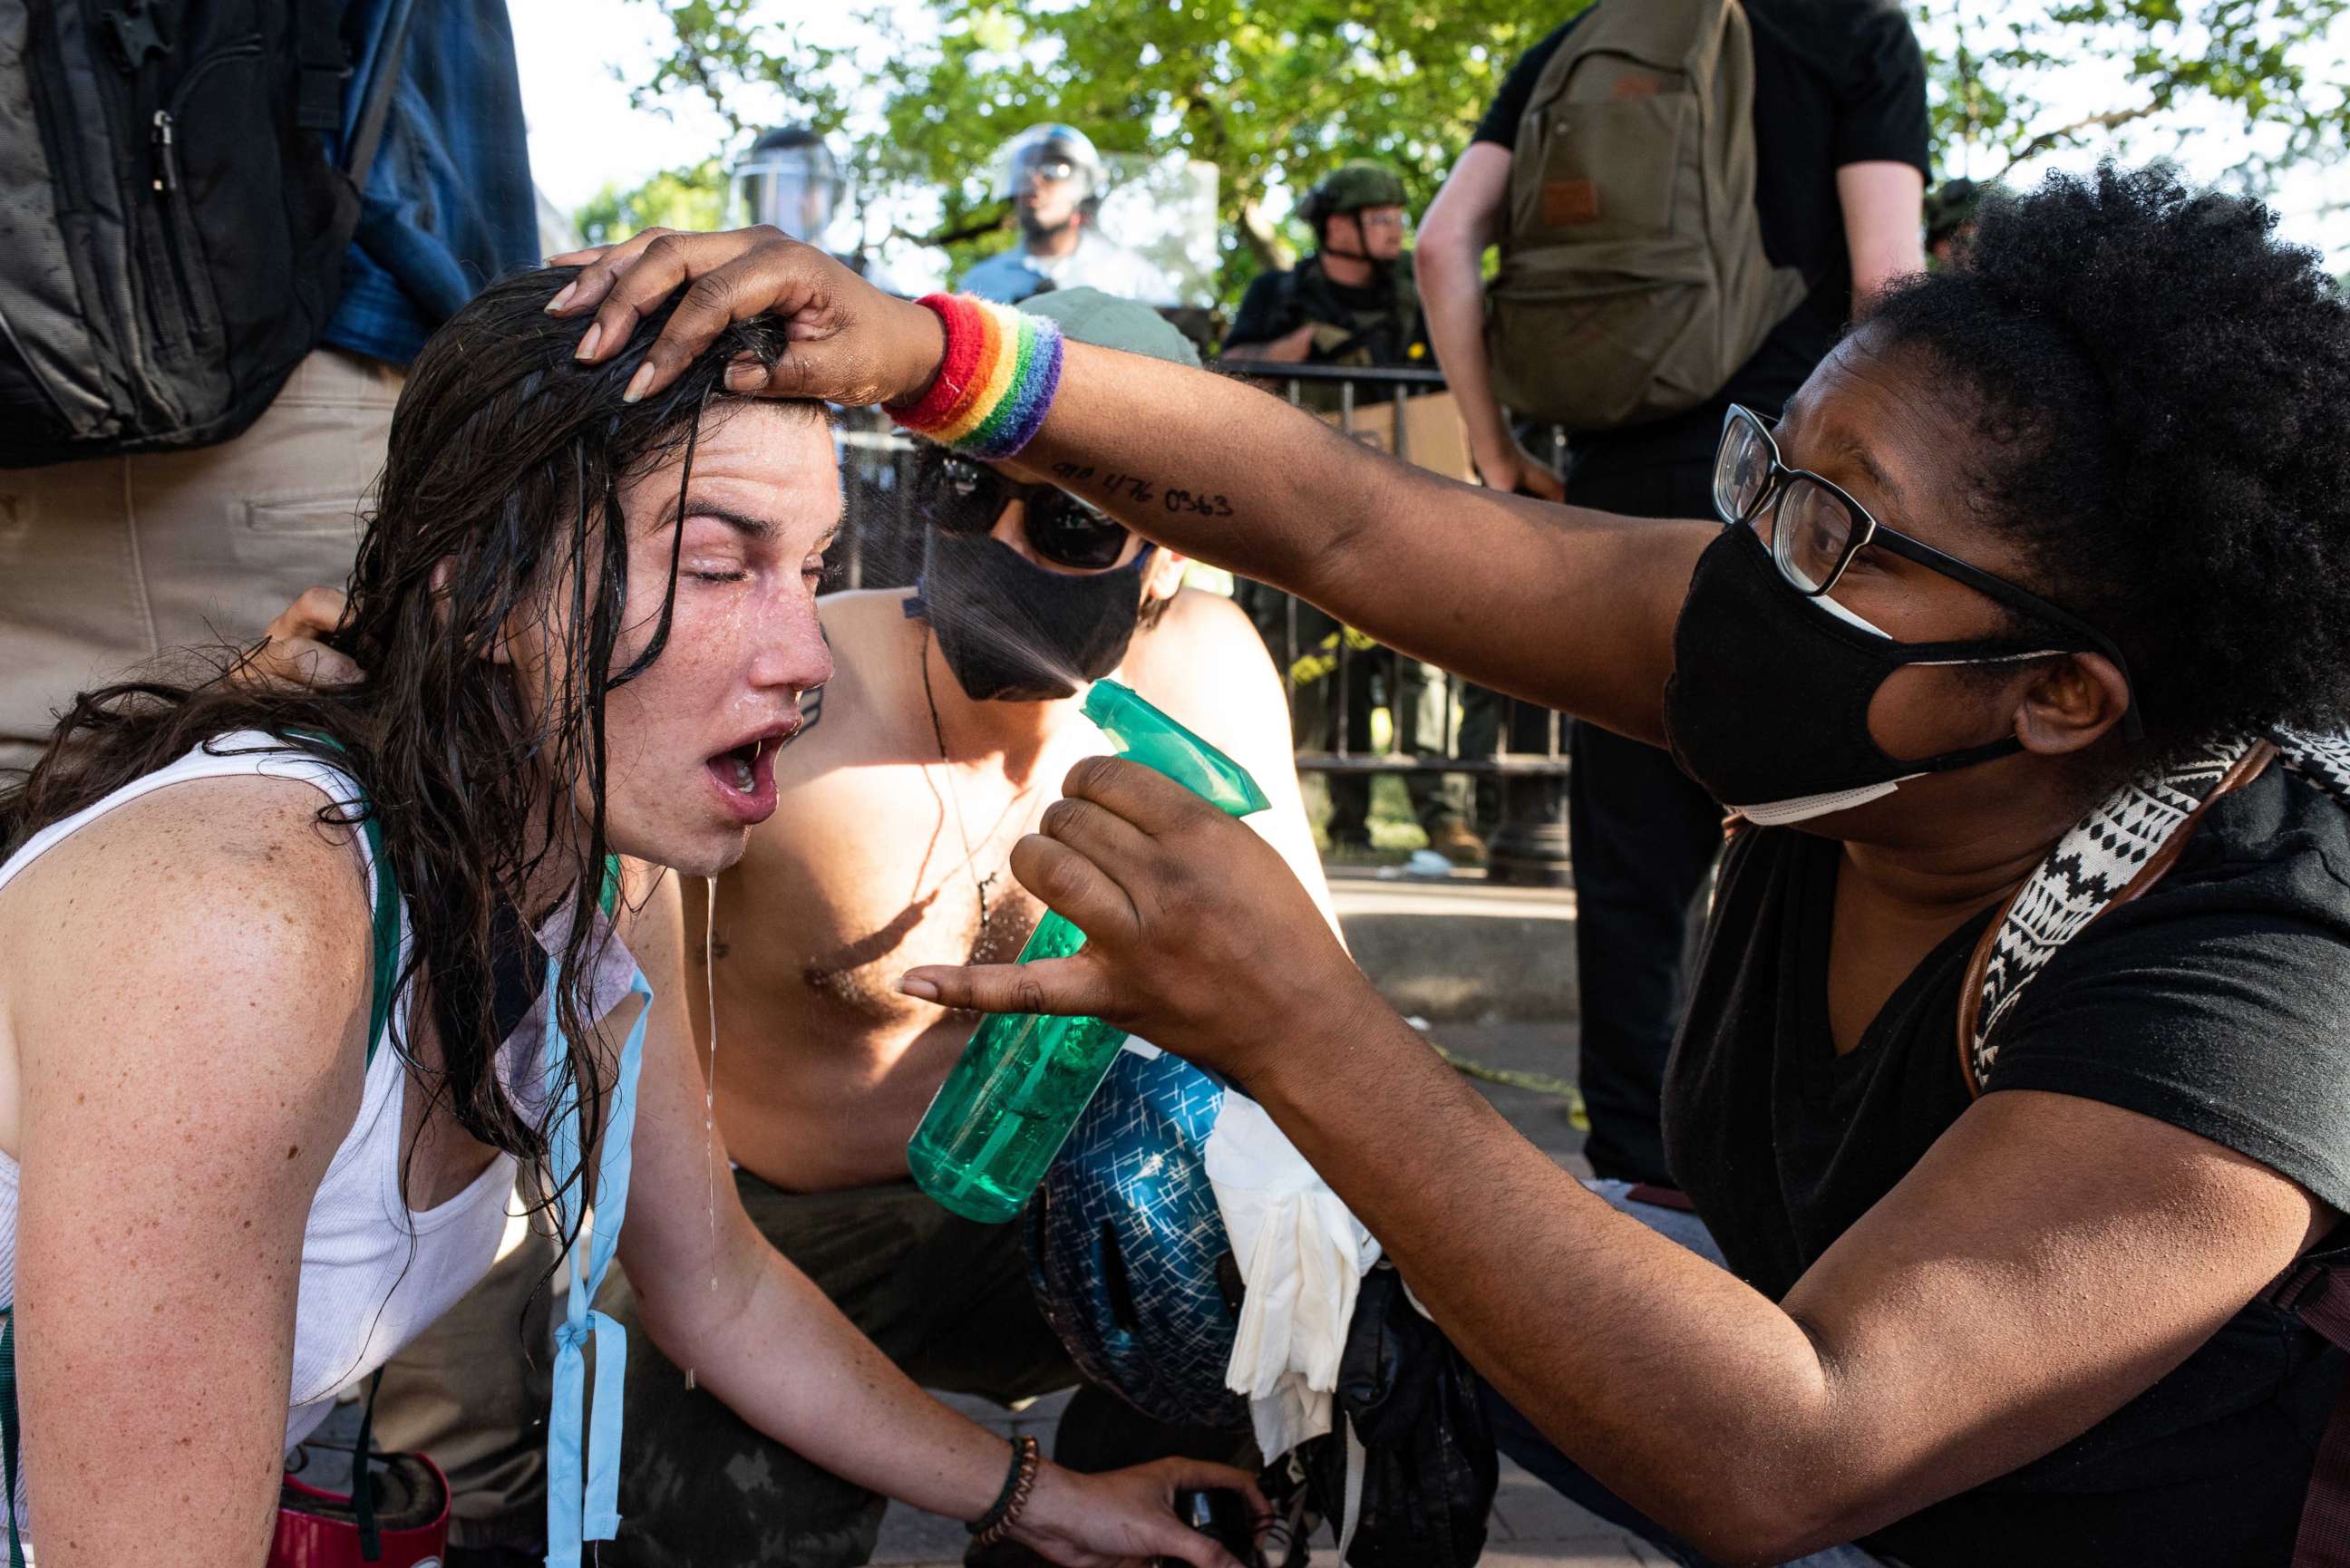 PHOTO: A woman has her eyes rinsed out, in Lafayette Square, near the White House, on June 1, 2020.